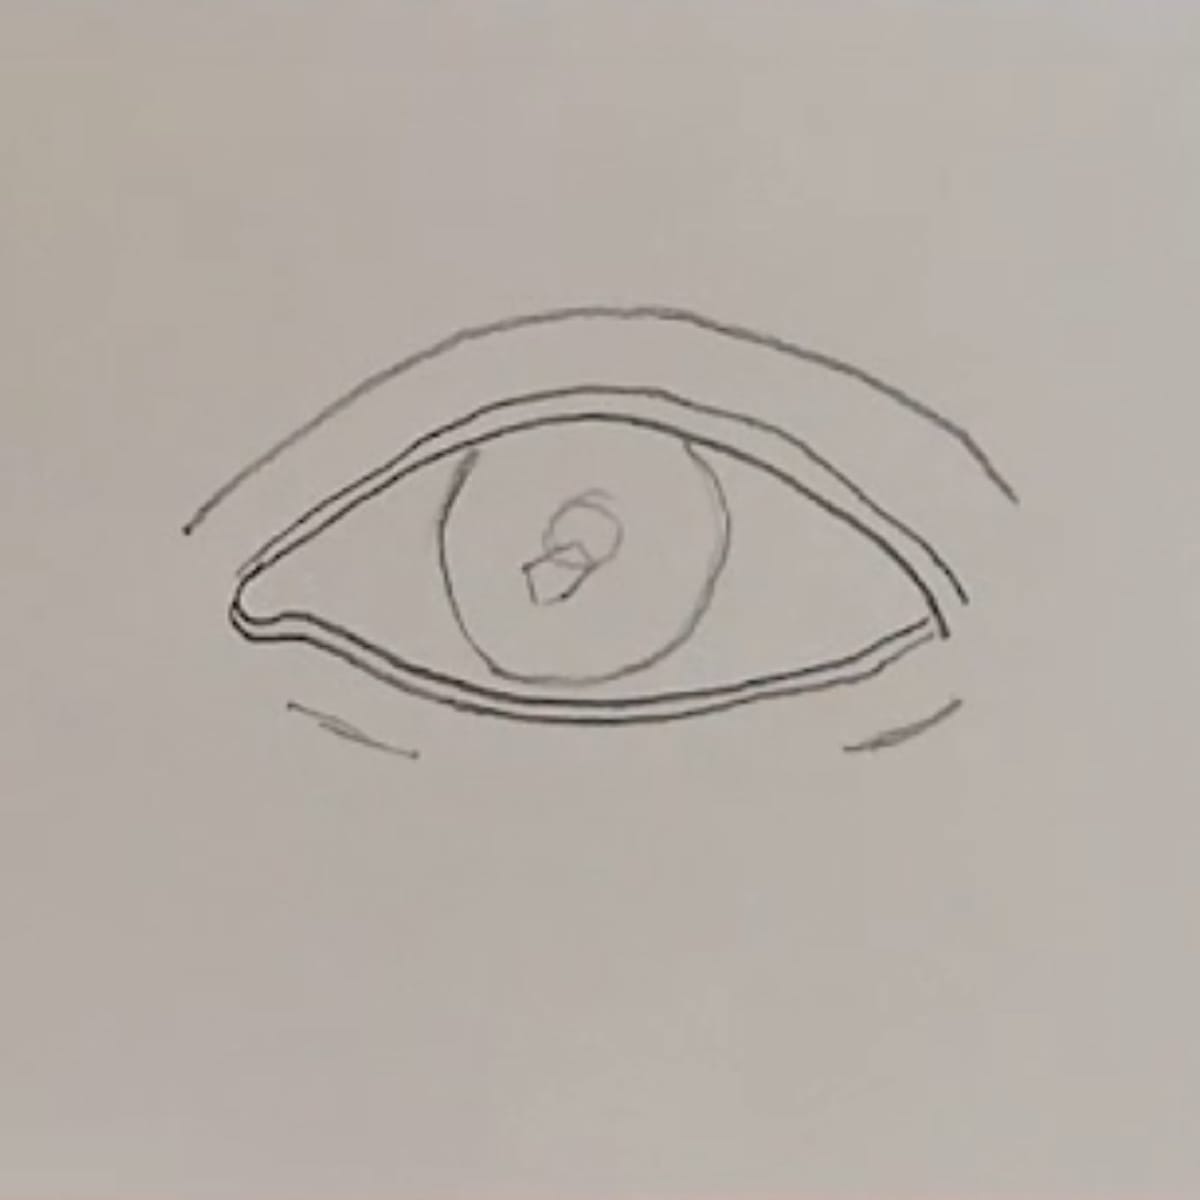 Draw in the iris, the pupil and a small highlight.